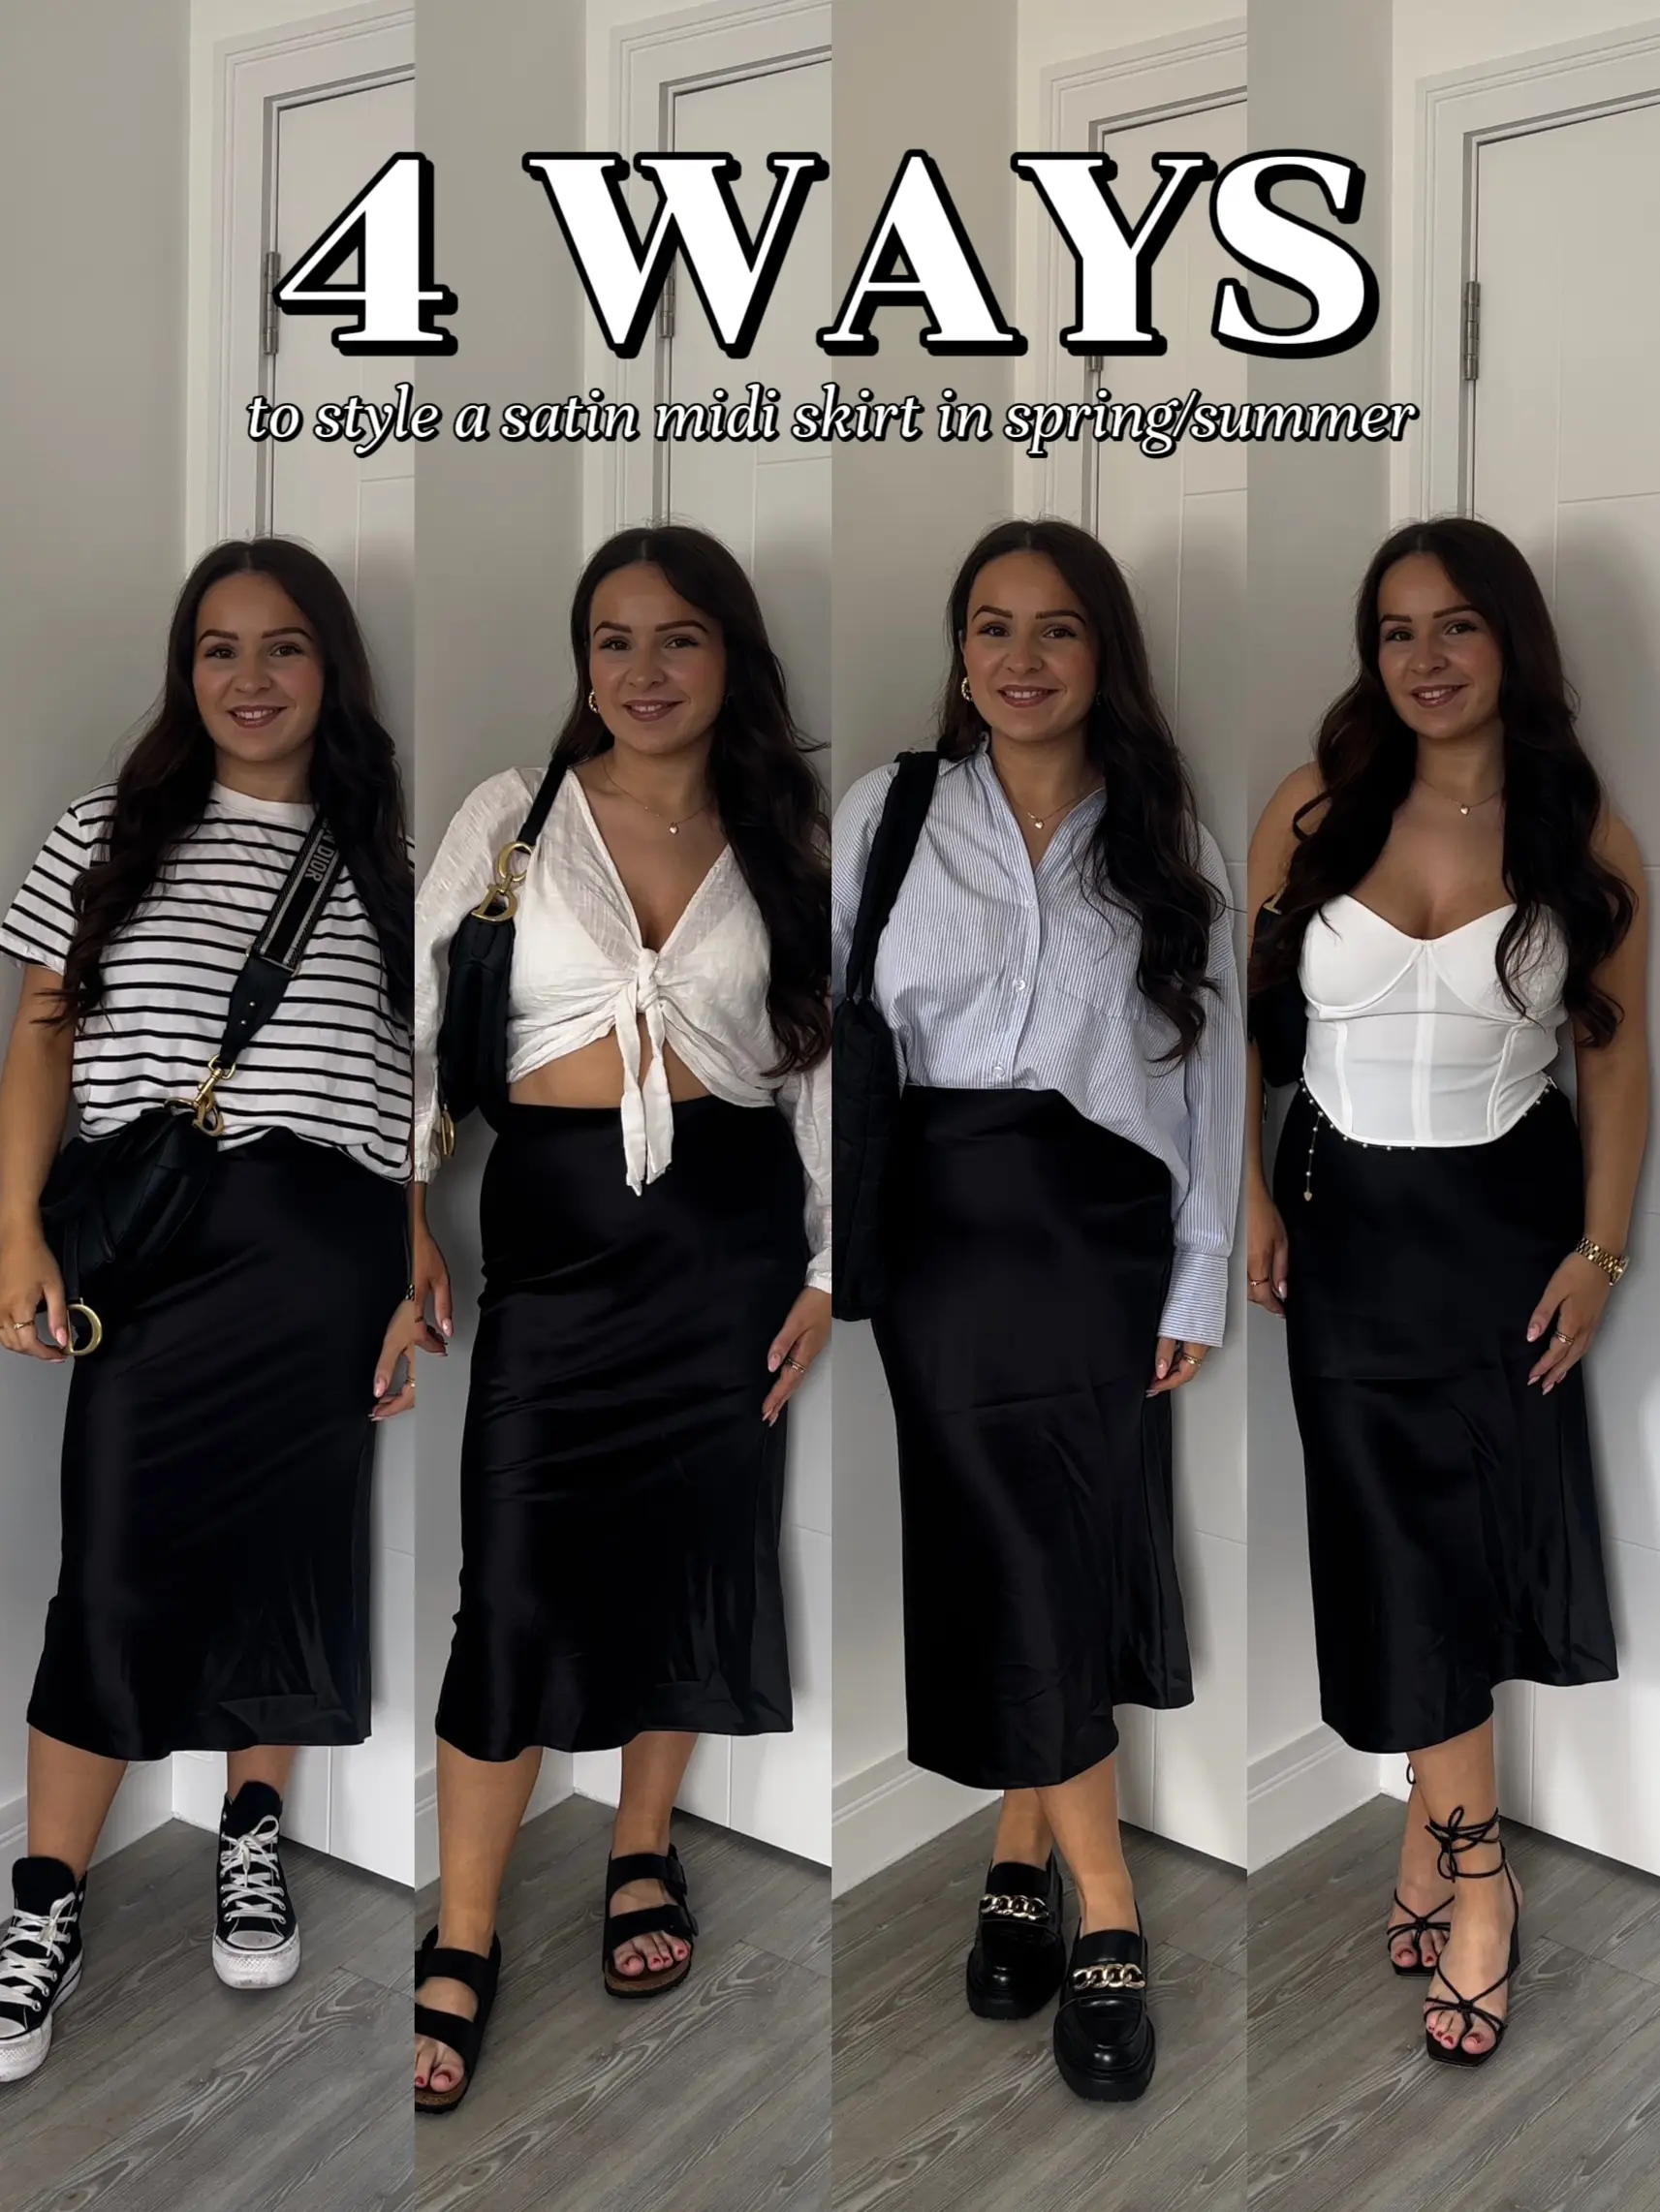 SATIN SKIRT WAYS TO WEAR, BLACK SATIN SKIRT OUTFITS! SPRING, 59% OFF